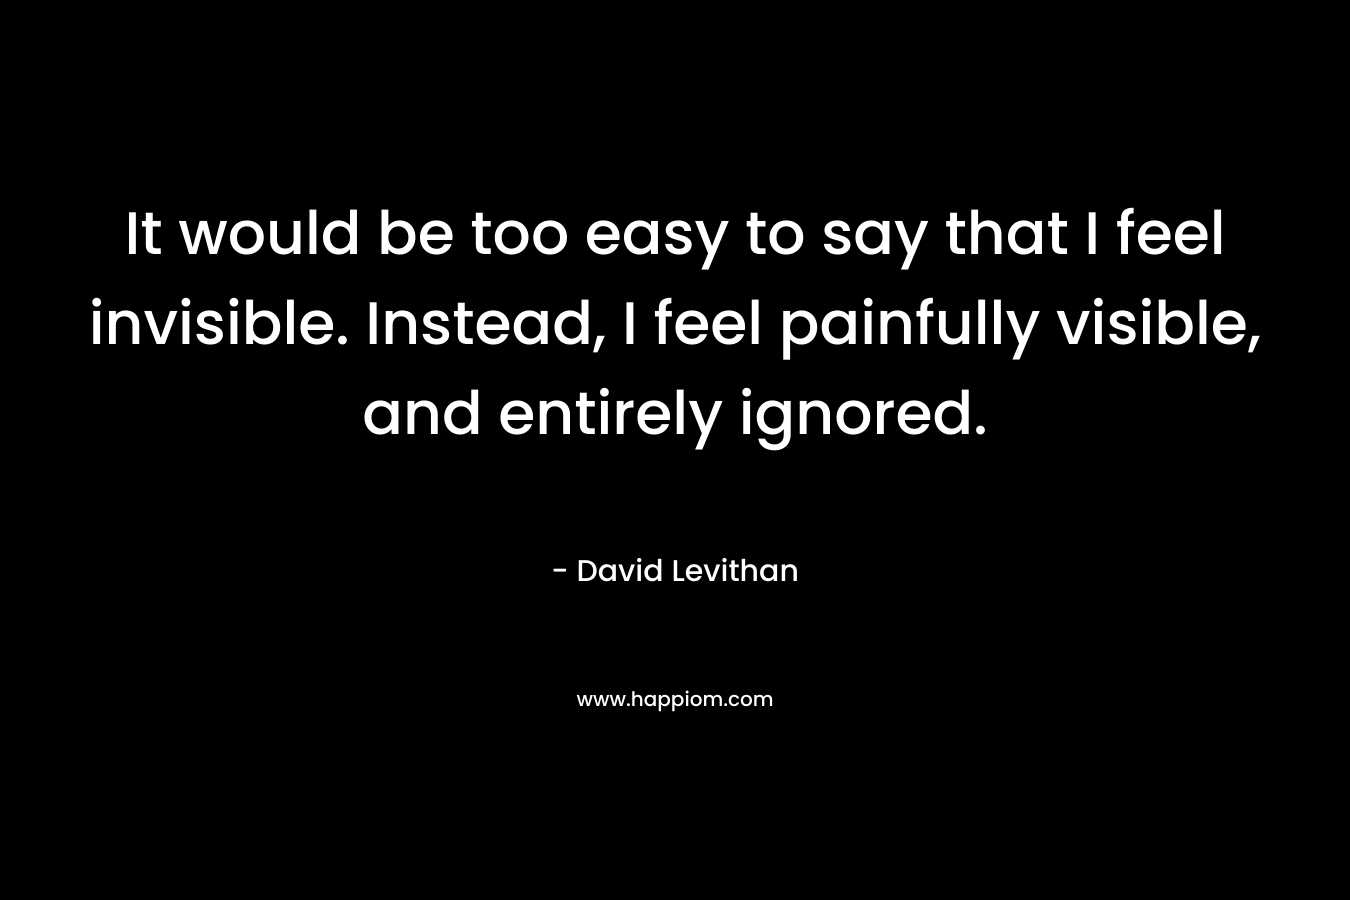 It would be too easy to say that I feel invisible. Instead, I feel painfully visible, and entirely ignored. – David Levithan